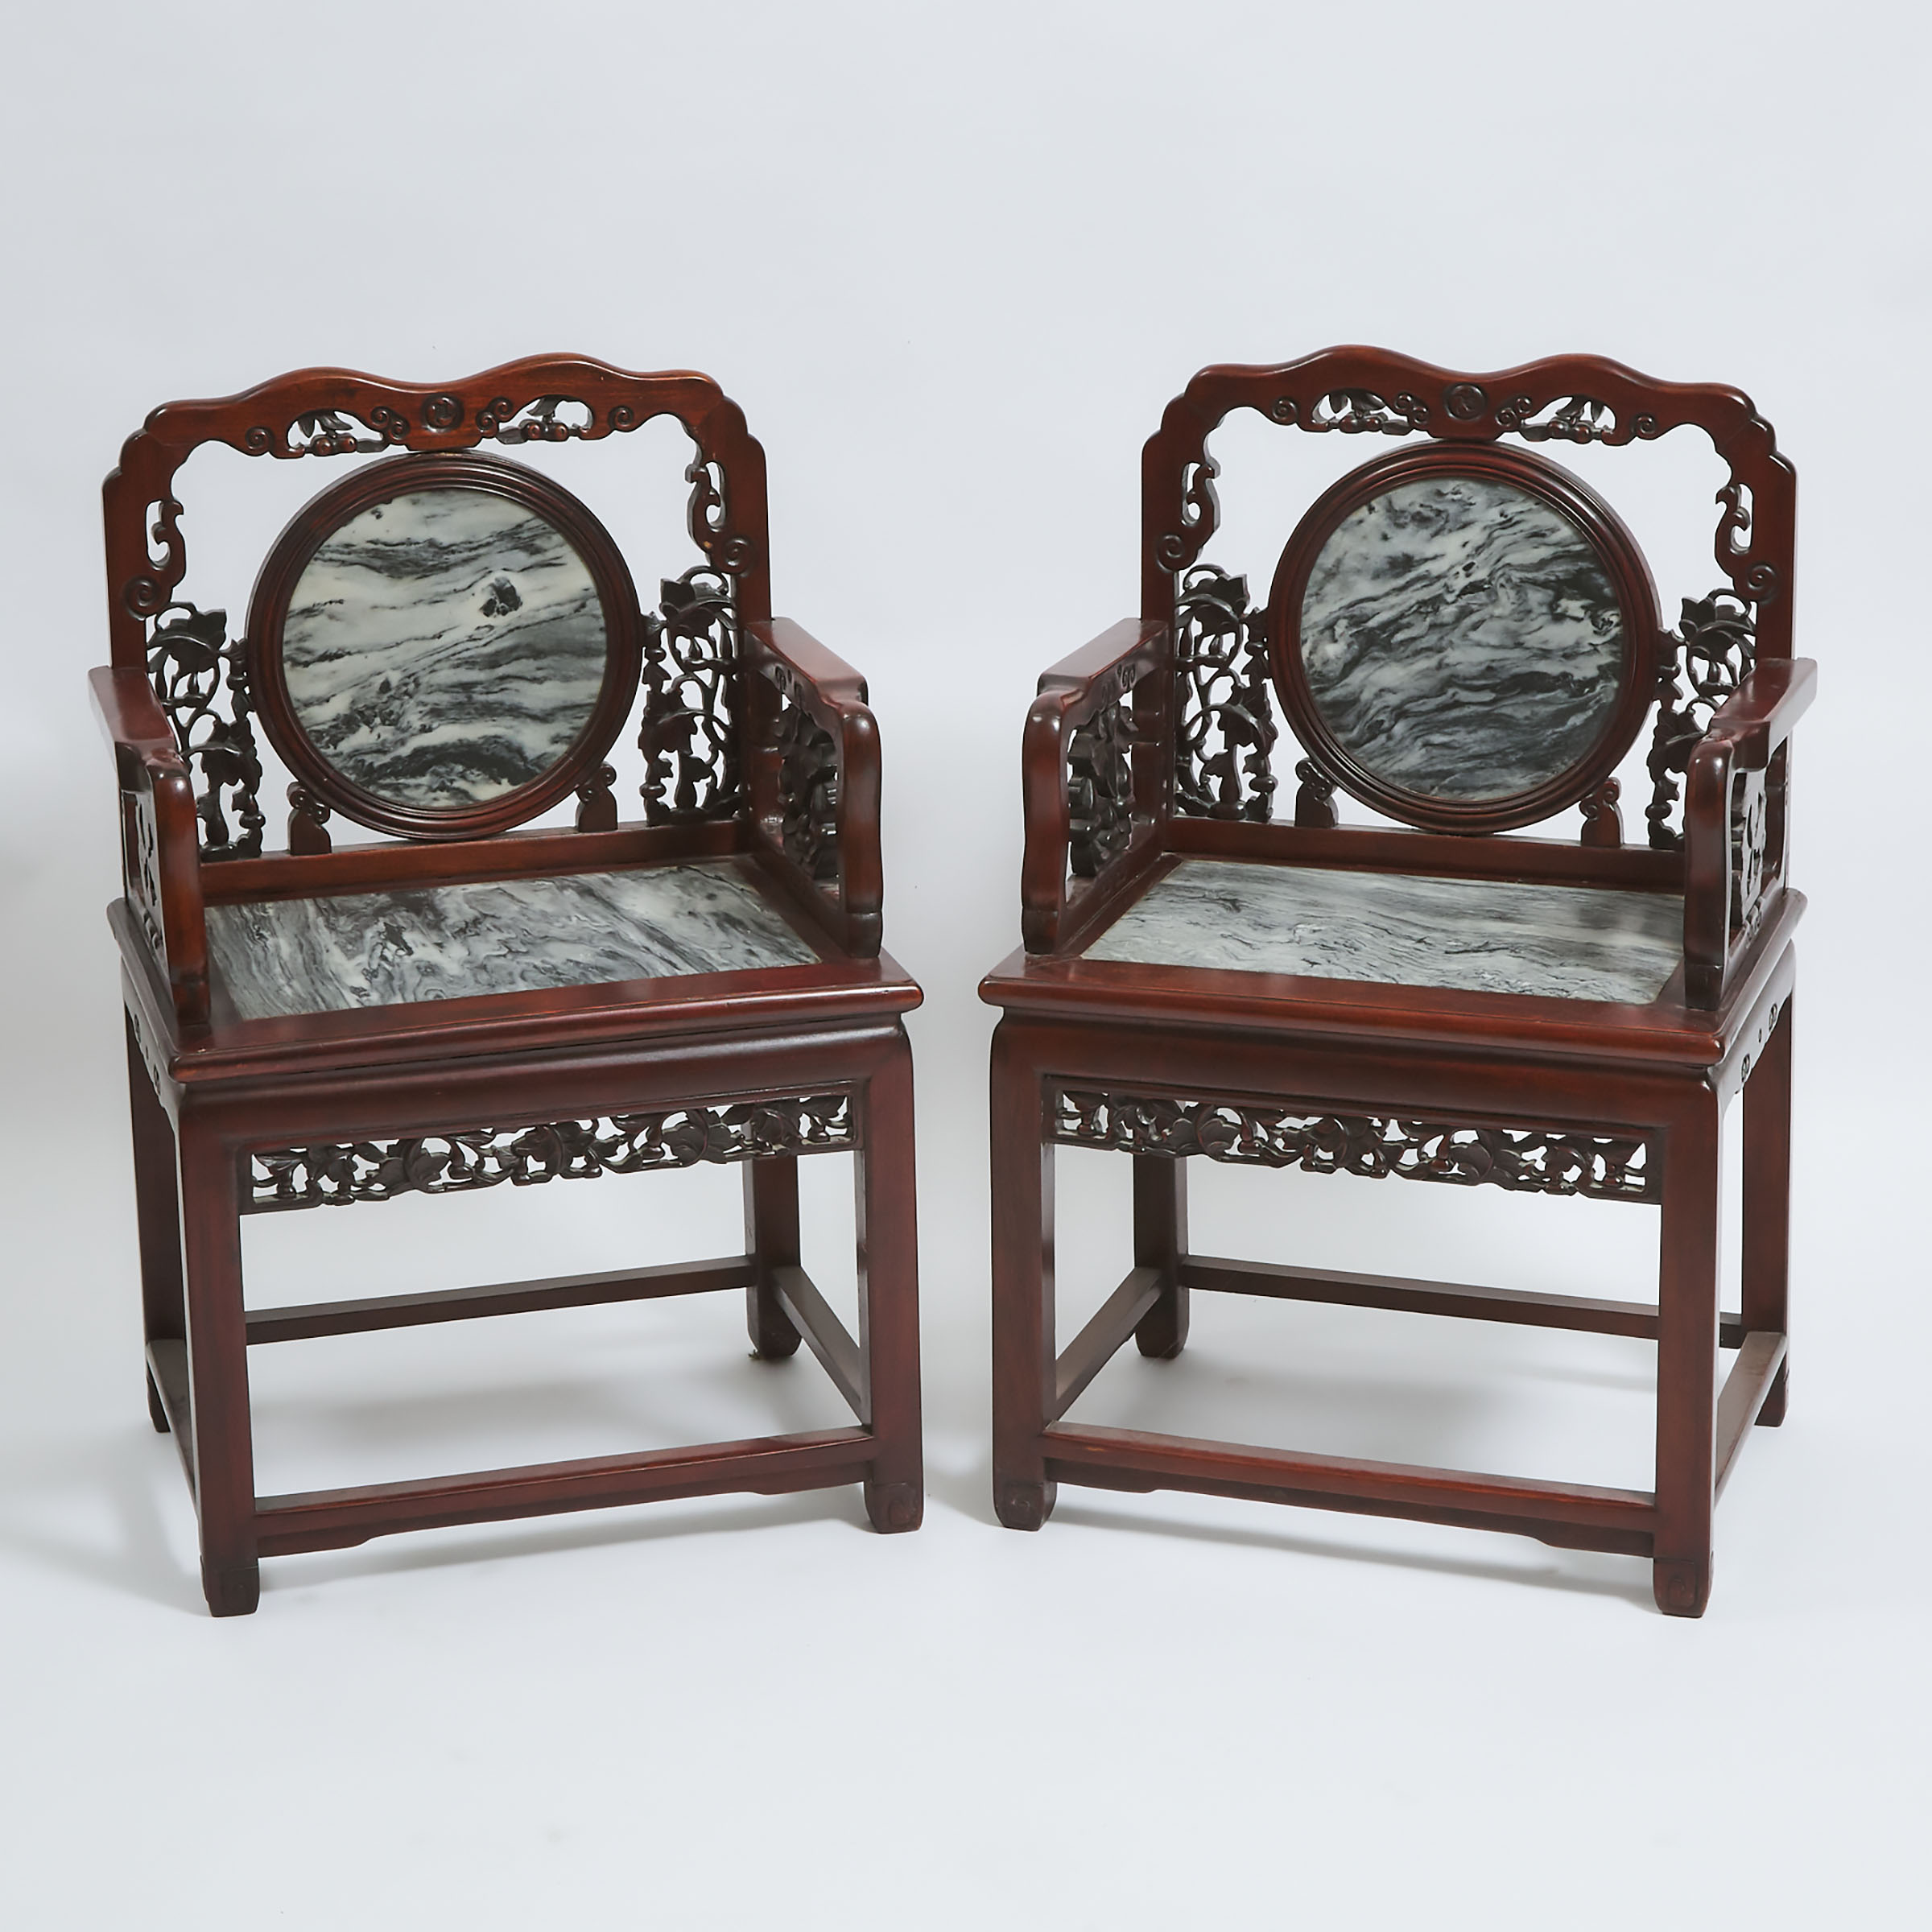 A Pair of Chinese Marble-Inset Rosewood Chairs, Mid 20th Century